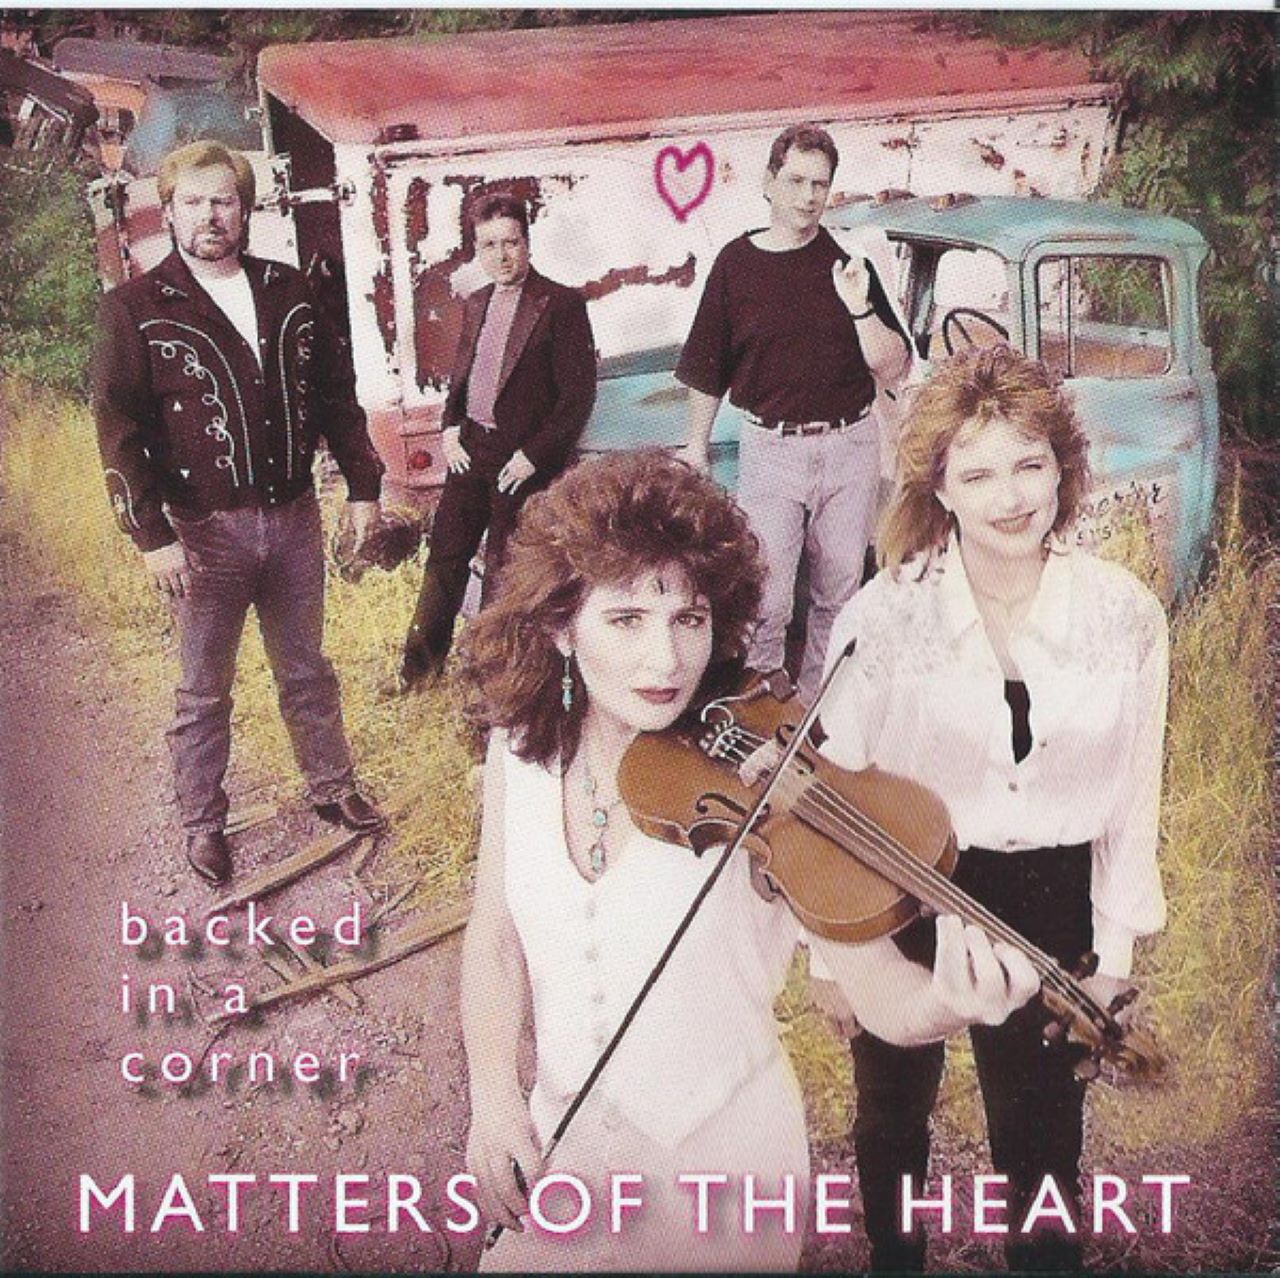 Matters Of The Heart - Backed In A Corner cover album